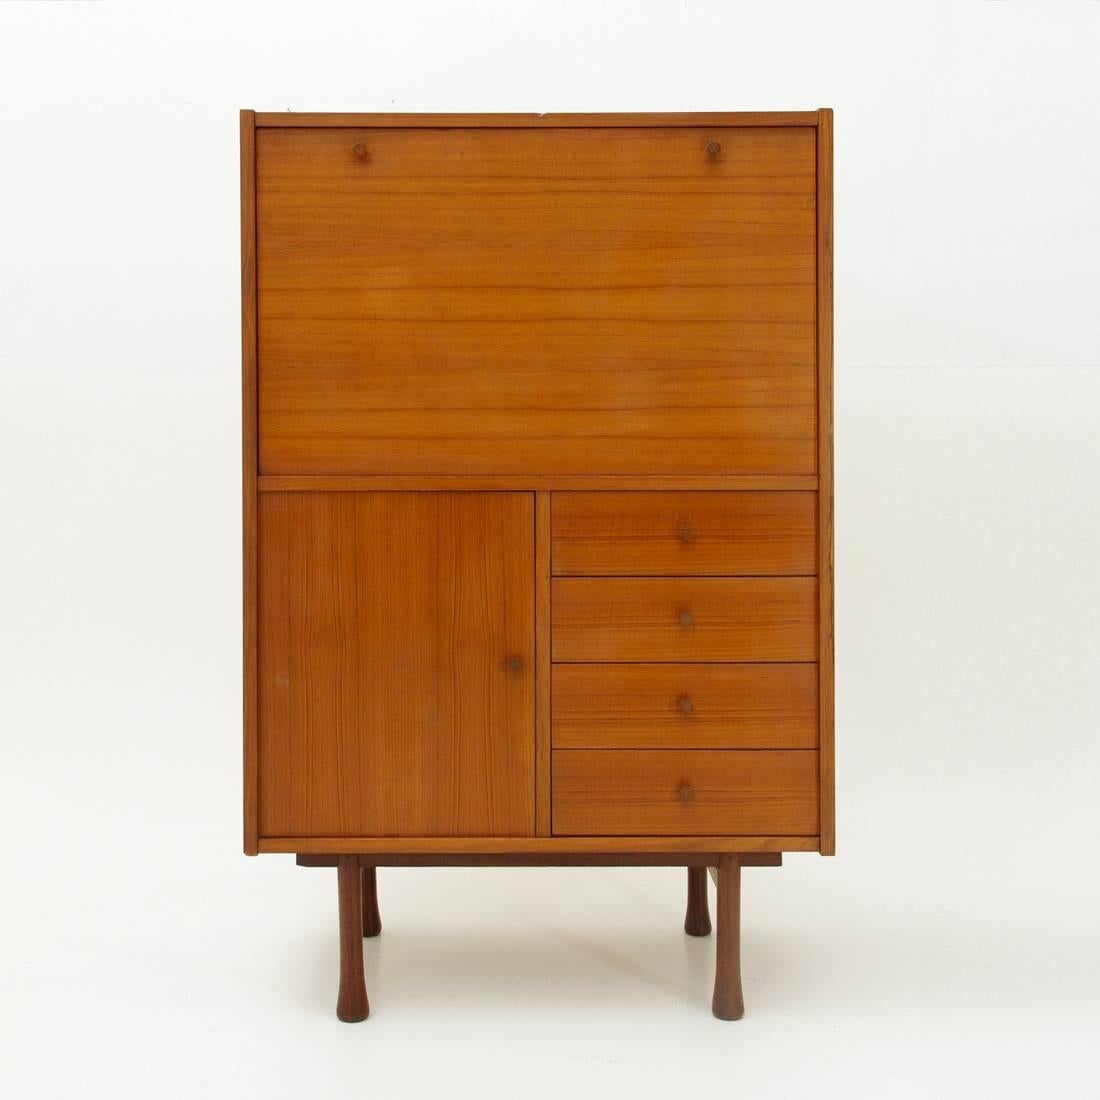 1960s Italian sideboard.
Teak veneered wood structure.
Drawers, flap compartment and storage compartment with wooden handles.
Wooden legs.
Structure in good condition, some shots and missing veneers visible in the picture.

Dimensions: Width